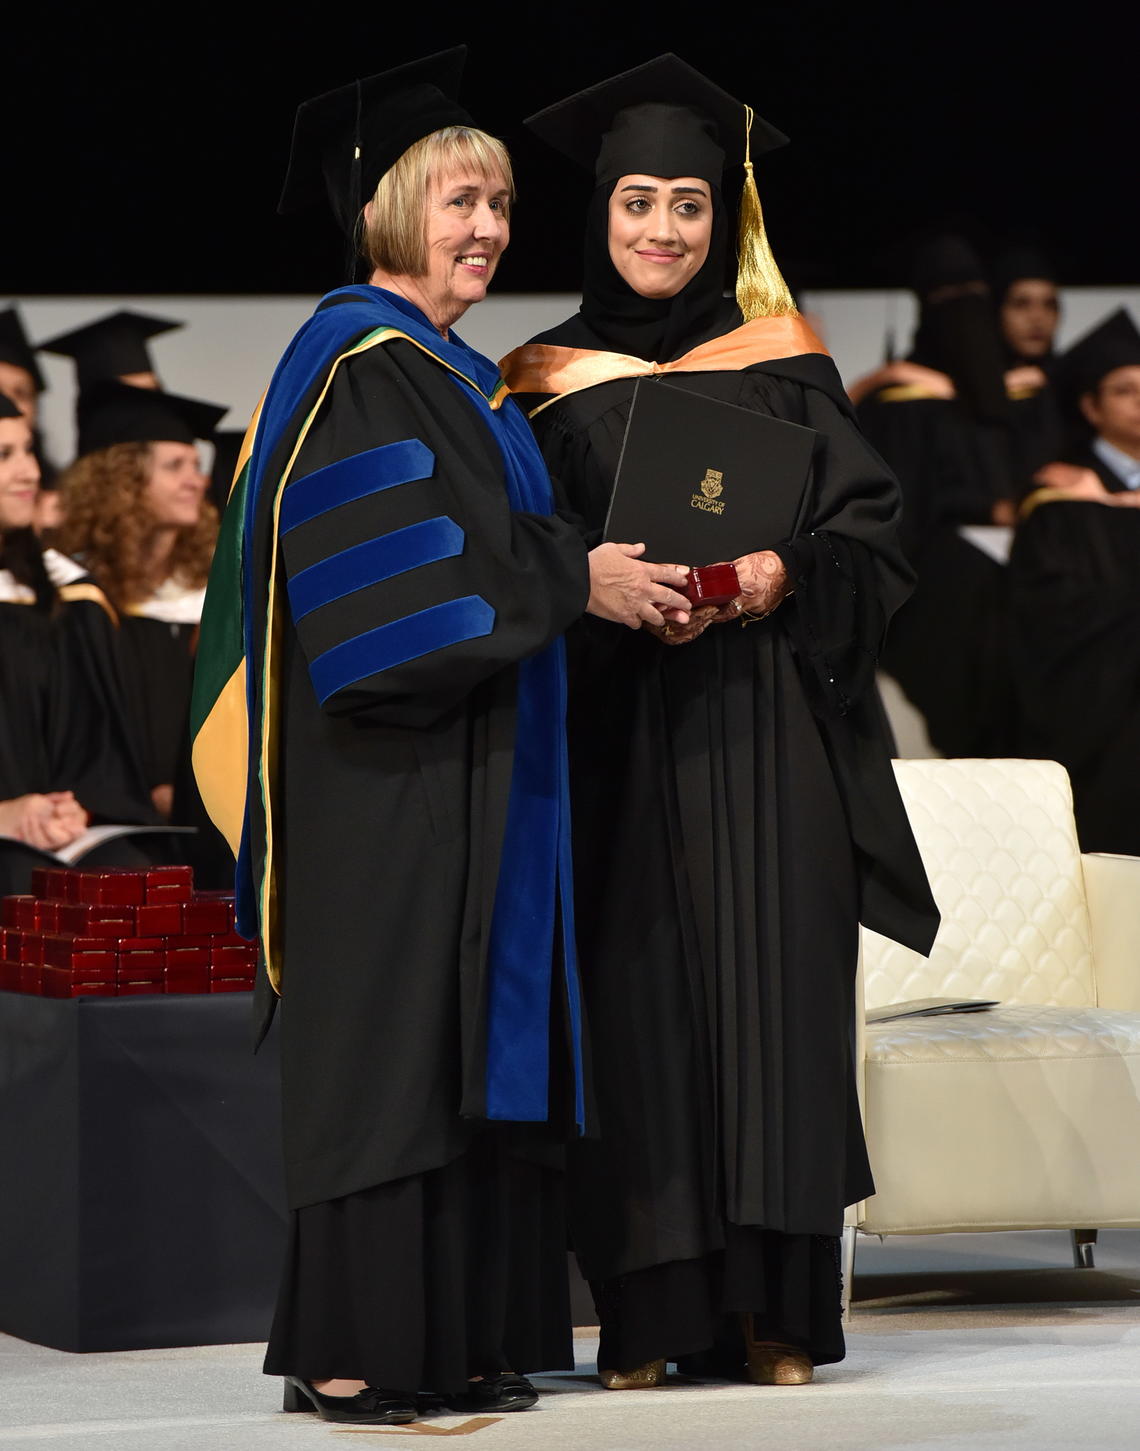 Dean Deborah White with a graduating student at the May 13 convocation ceremonies in Qatar.